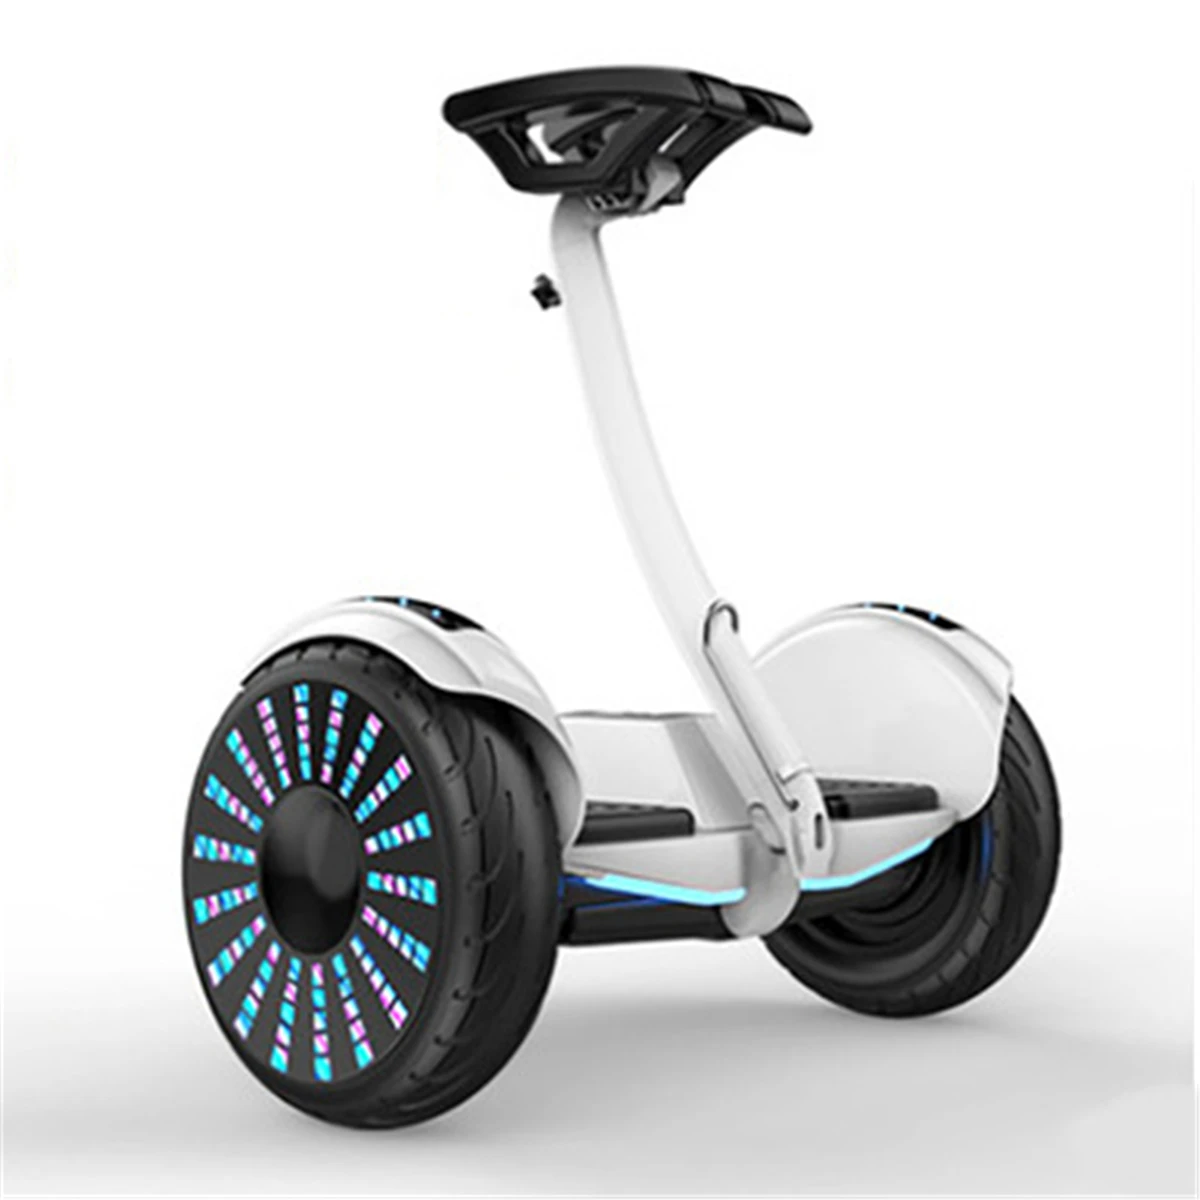 

Wholesale 36V/54V New Design Mini 2 Whee Scooter Cool Balancing Vehicle Self Balance Electric Standing Scooter